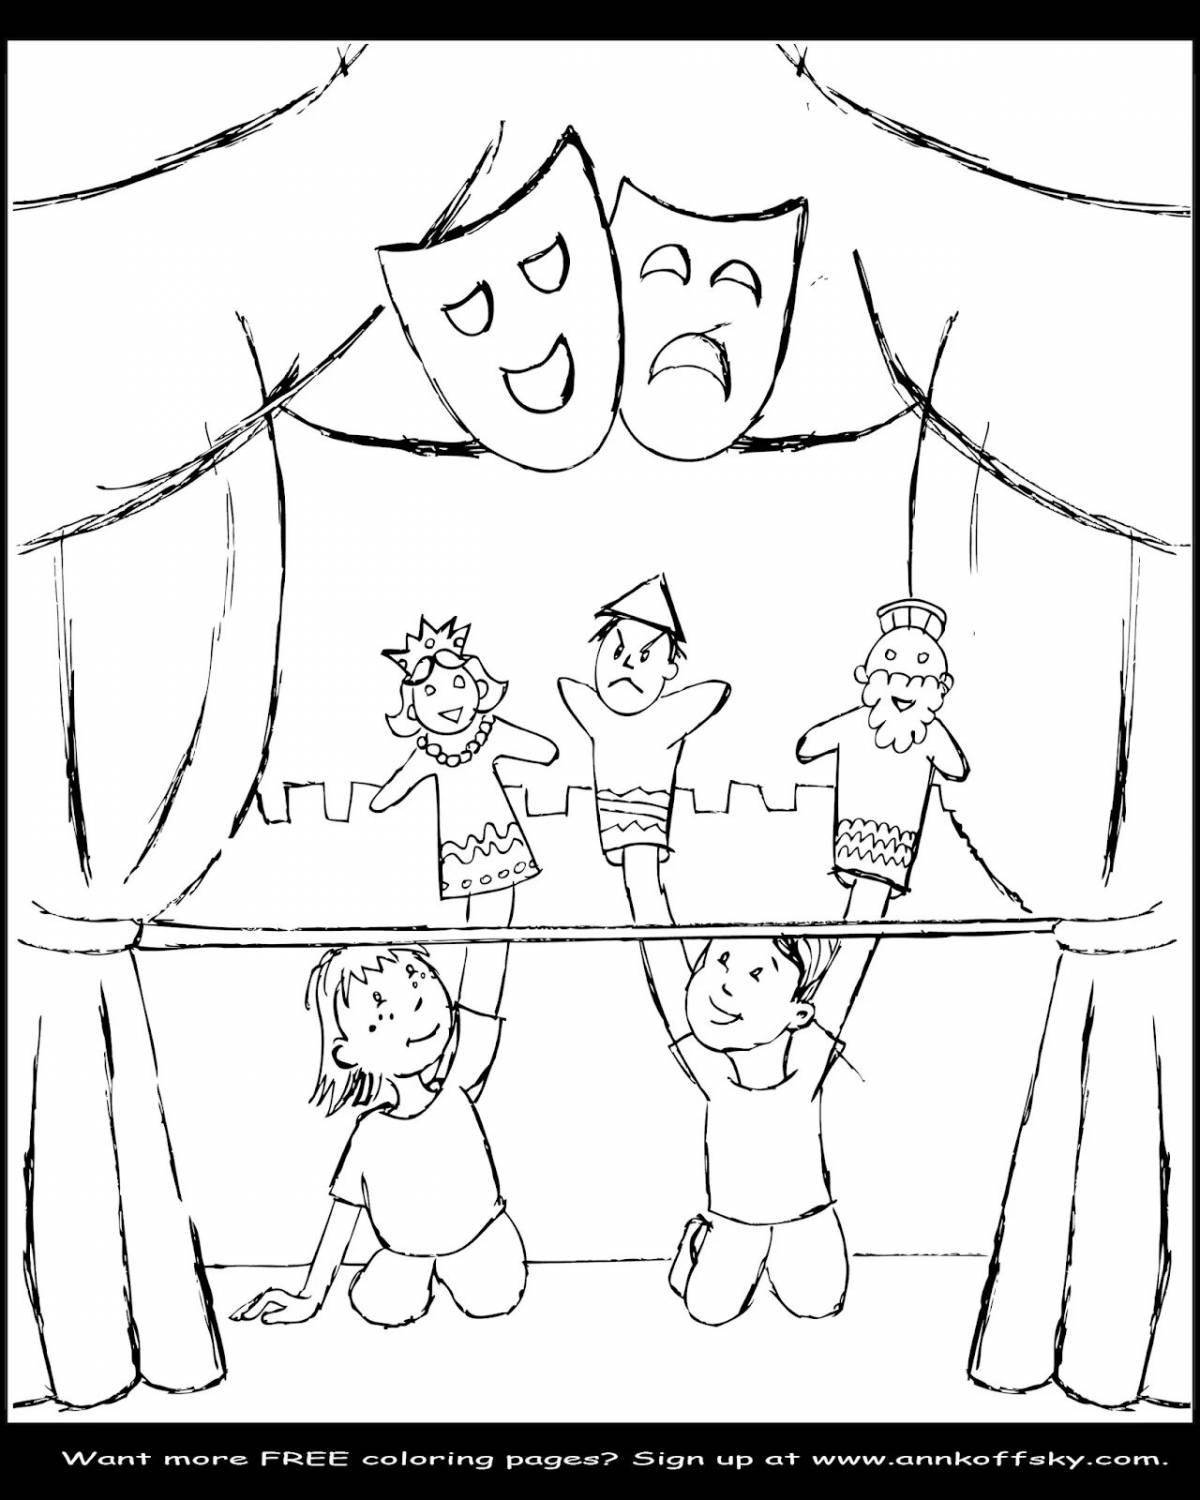 Puppet theater #3